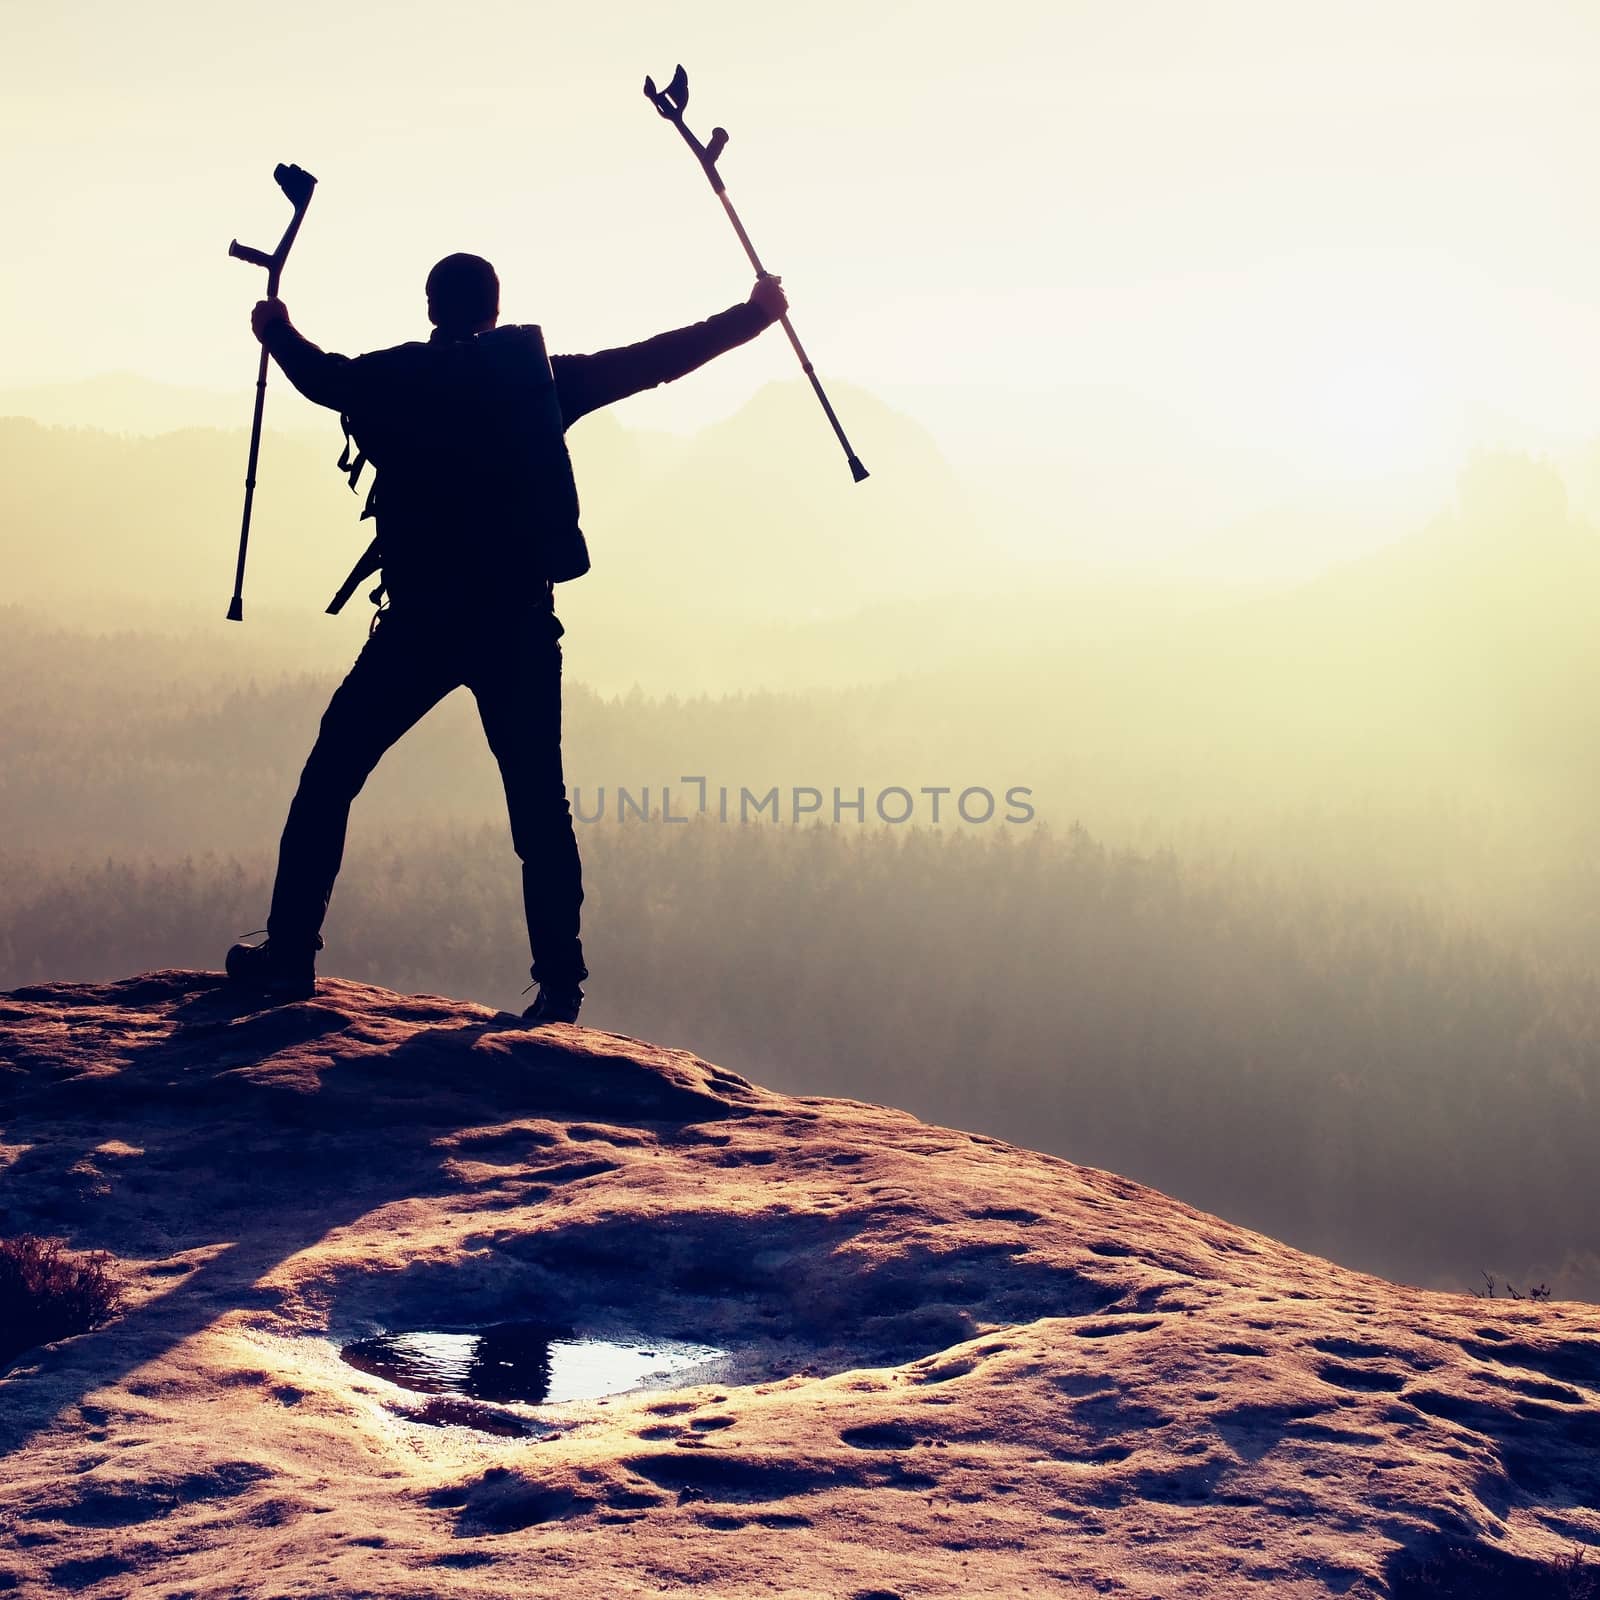 Tourist with  medicine crutch above head achieved mountain peak. Hiker with broken leg in immobilizer.  Deep misty valley bellow silhouette of man with hand in air. Spring daybreak